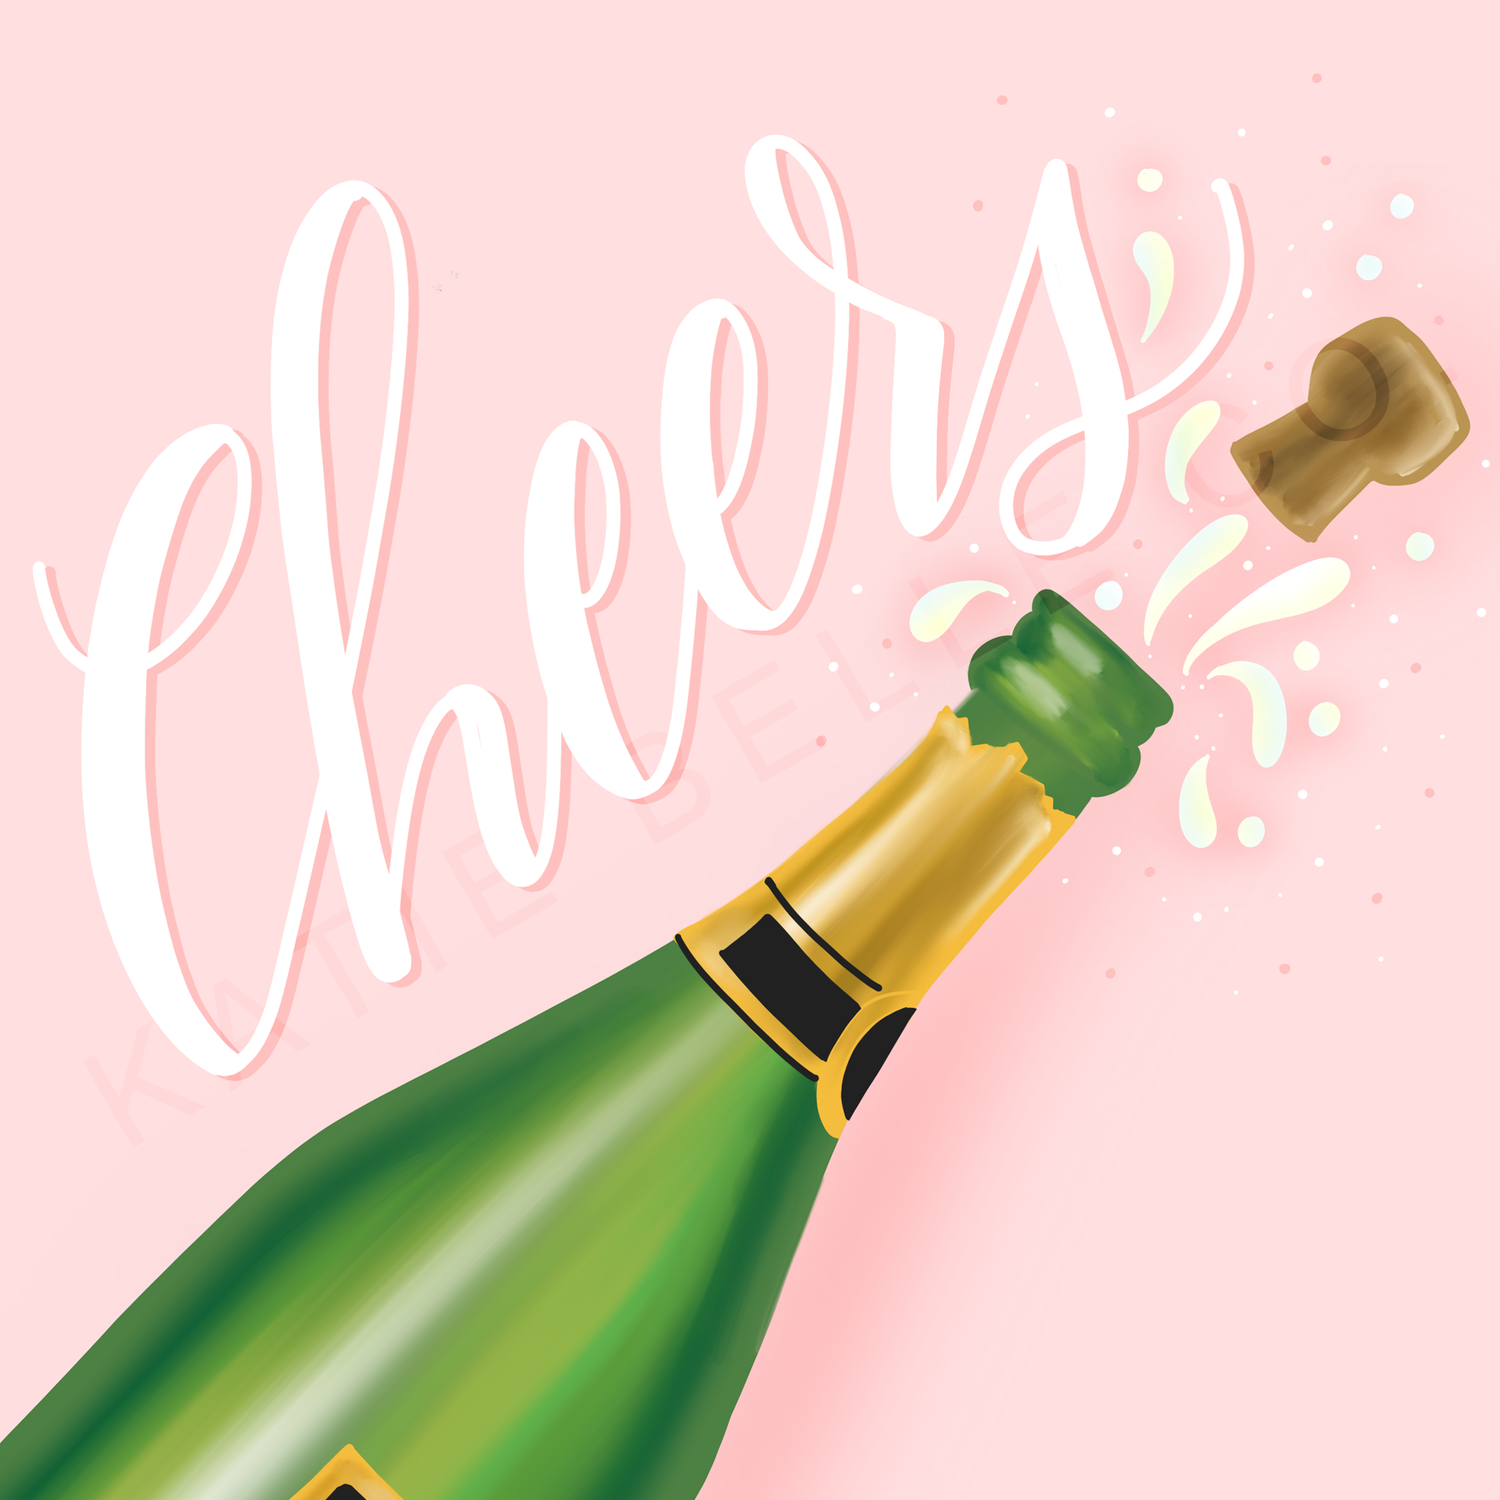 Cheers, cheers greeting card, celebration greeting card, popping champagne bottle. katie belle co. wedding celebration. wedding congrats. new job card. congratulations greeting card. champagne bubbles. flying cork. green champagne bottle. classic champagne. 